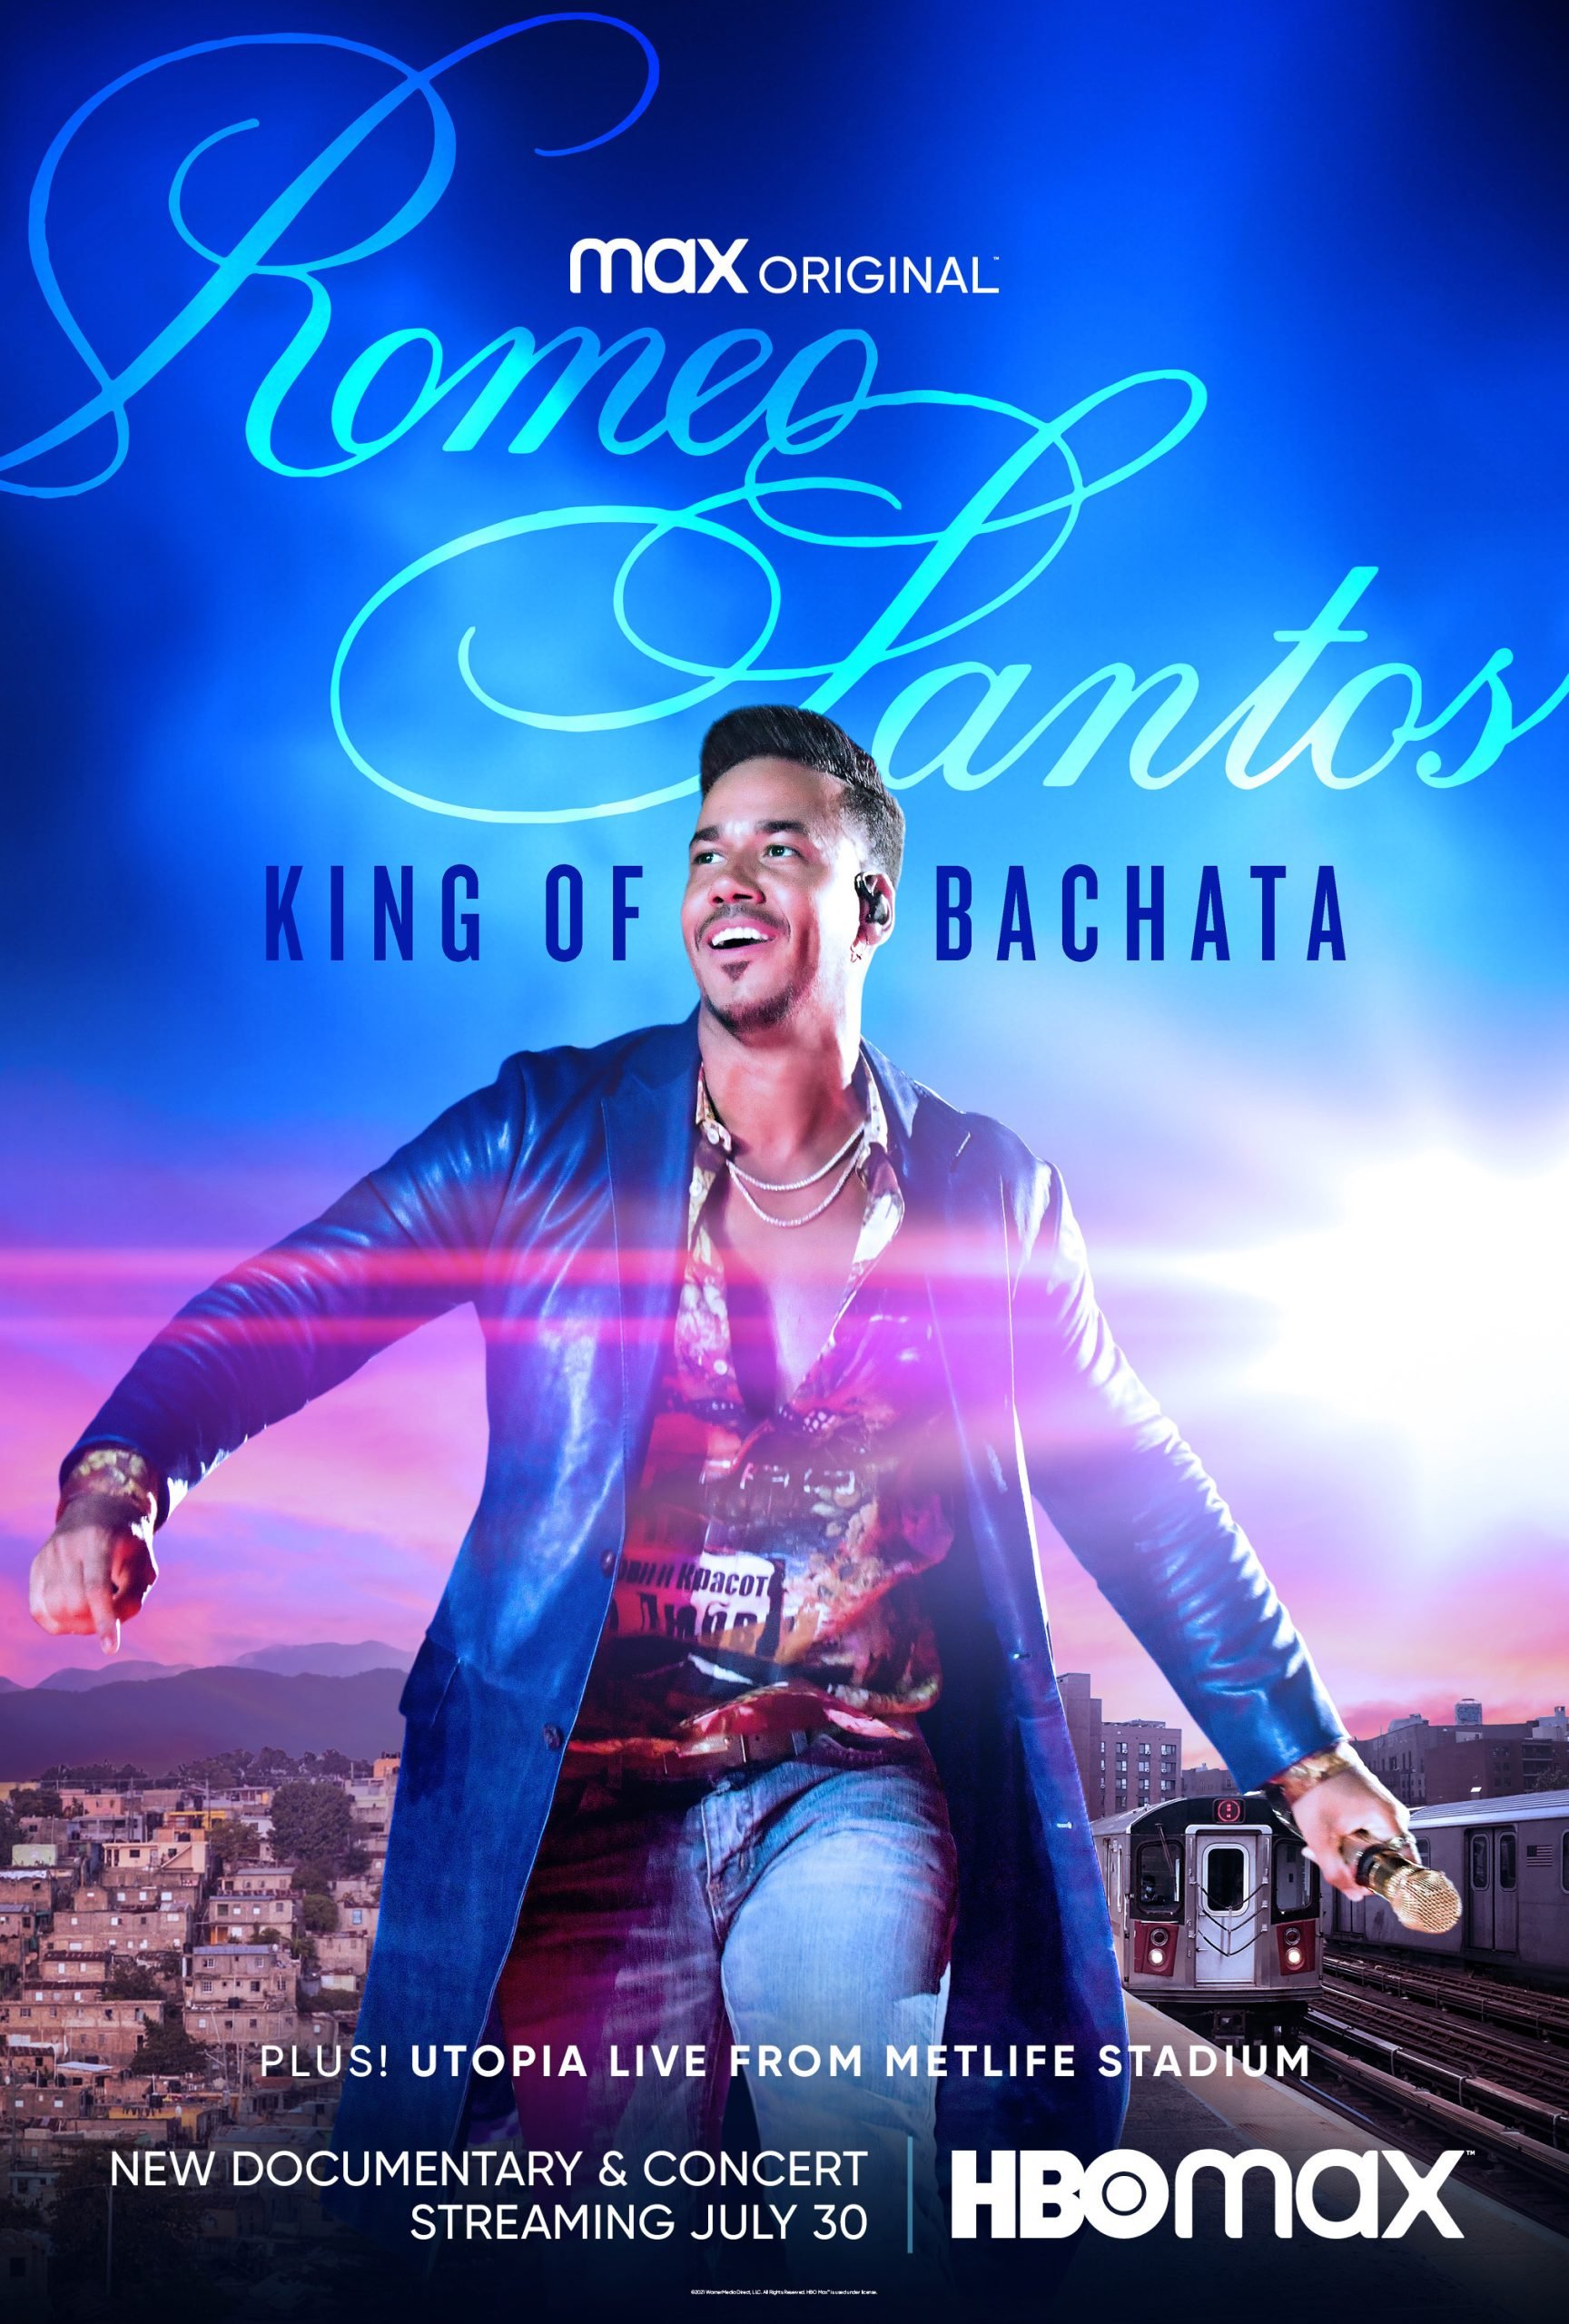 Movie poster for Romeo Santos: King of Bachata. Part of Sony Music's Premium Content Division.